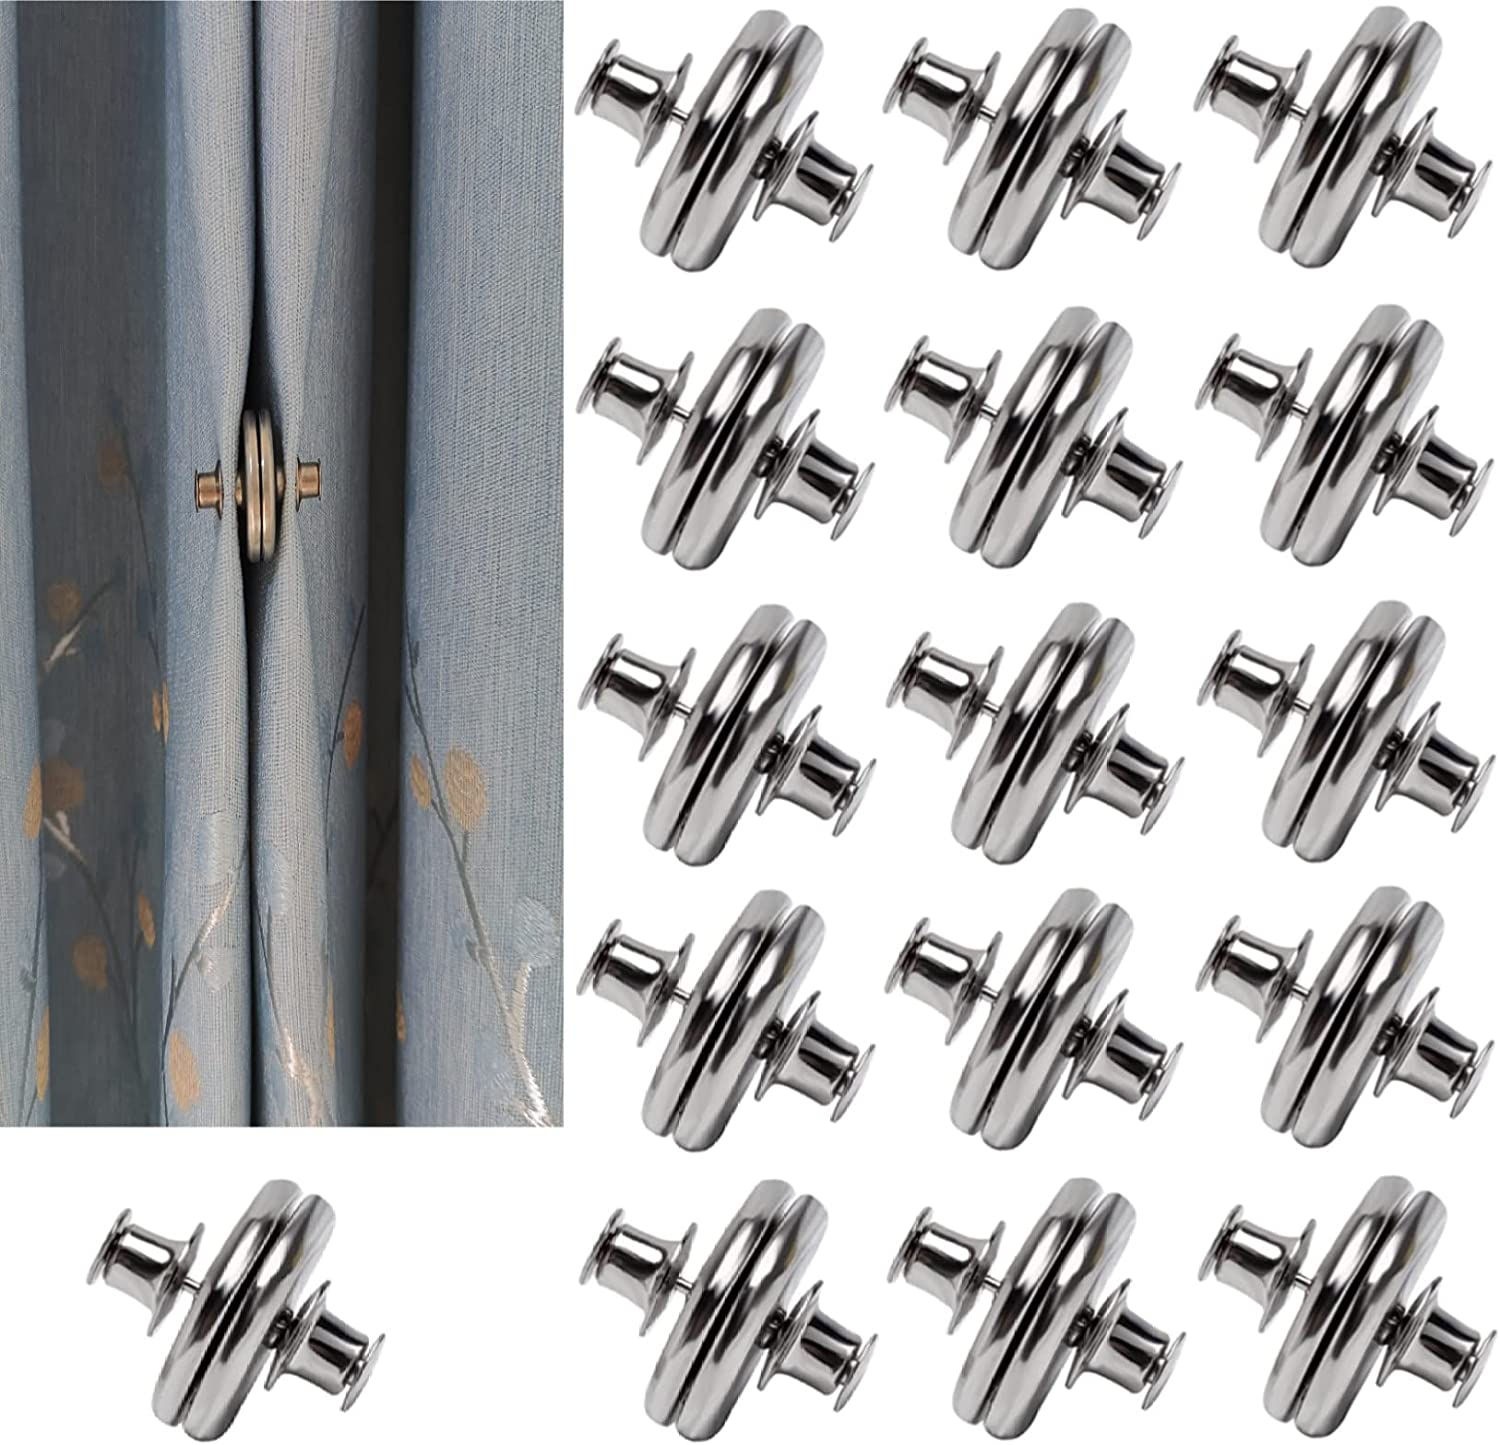 6 Pairs Curtain Magnets Closure, Magnetic Curtain Clips for Indoor Outdoor  Curtains Prevent Light Leaking, Strong Curtain Weights Magnets for Pergola